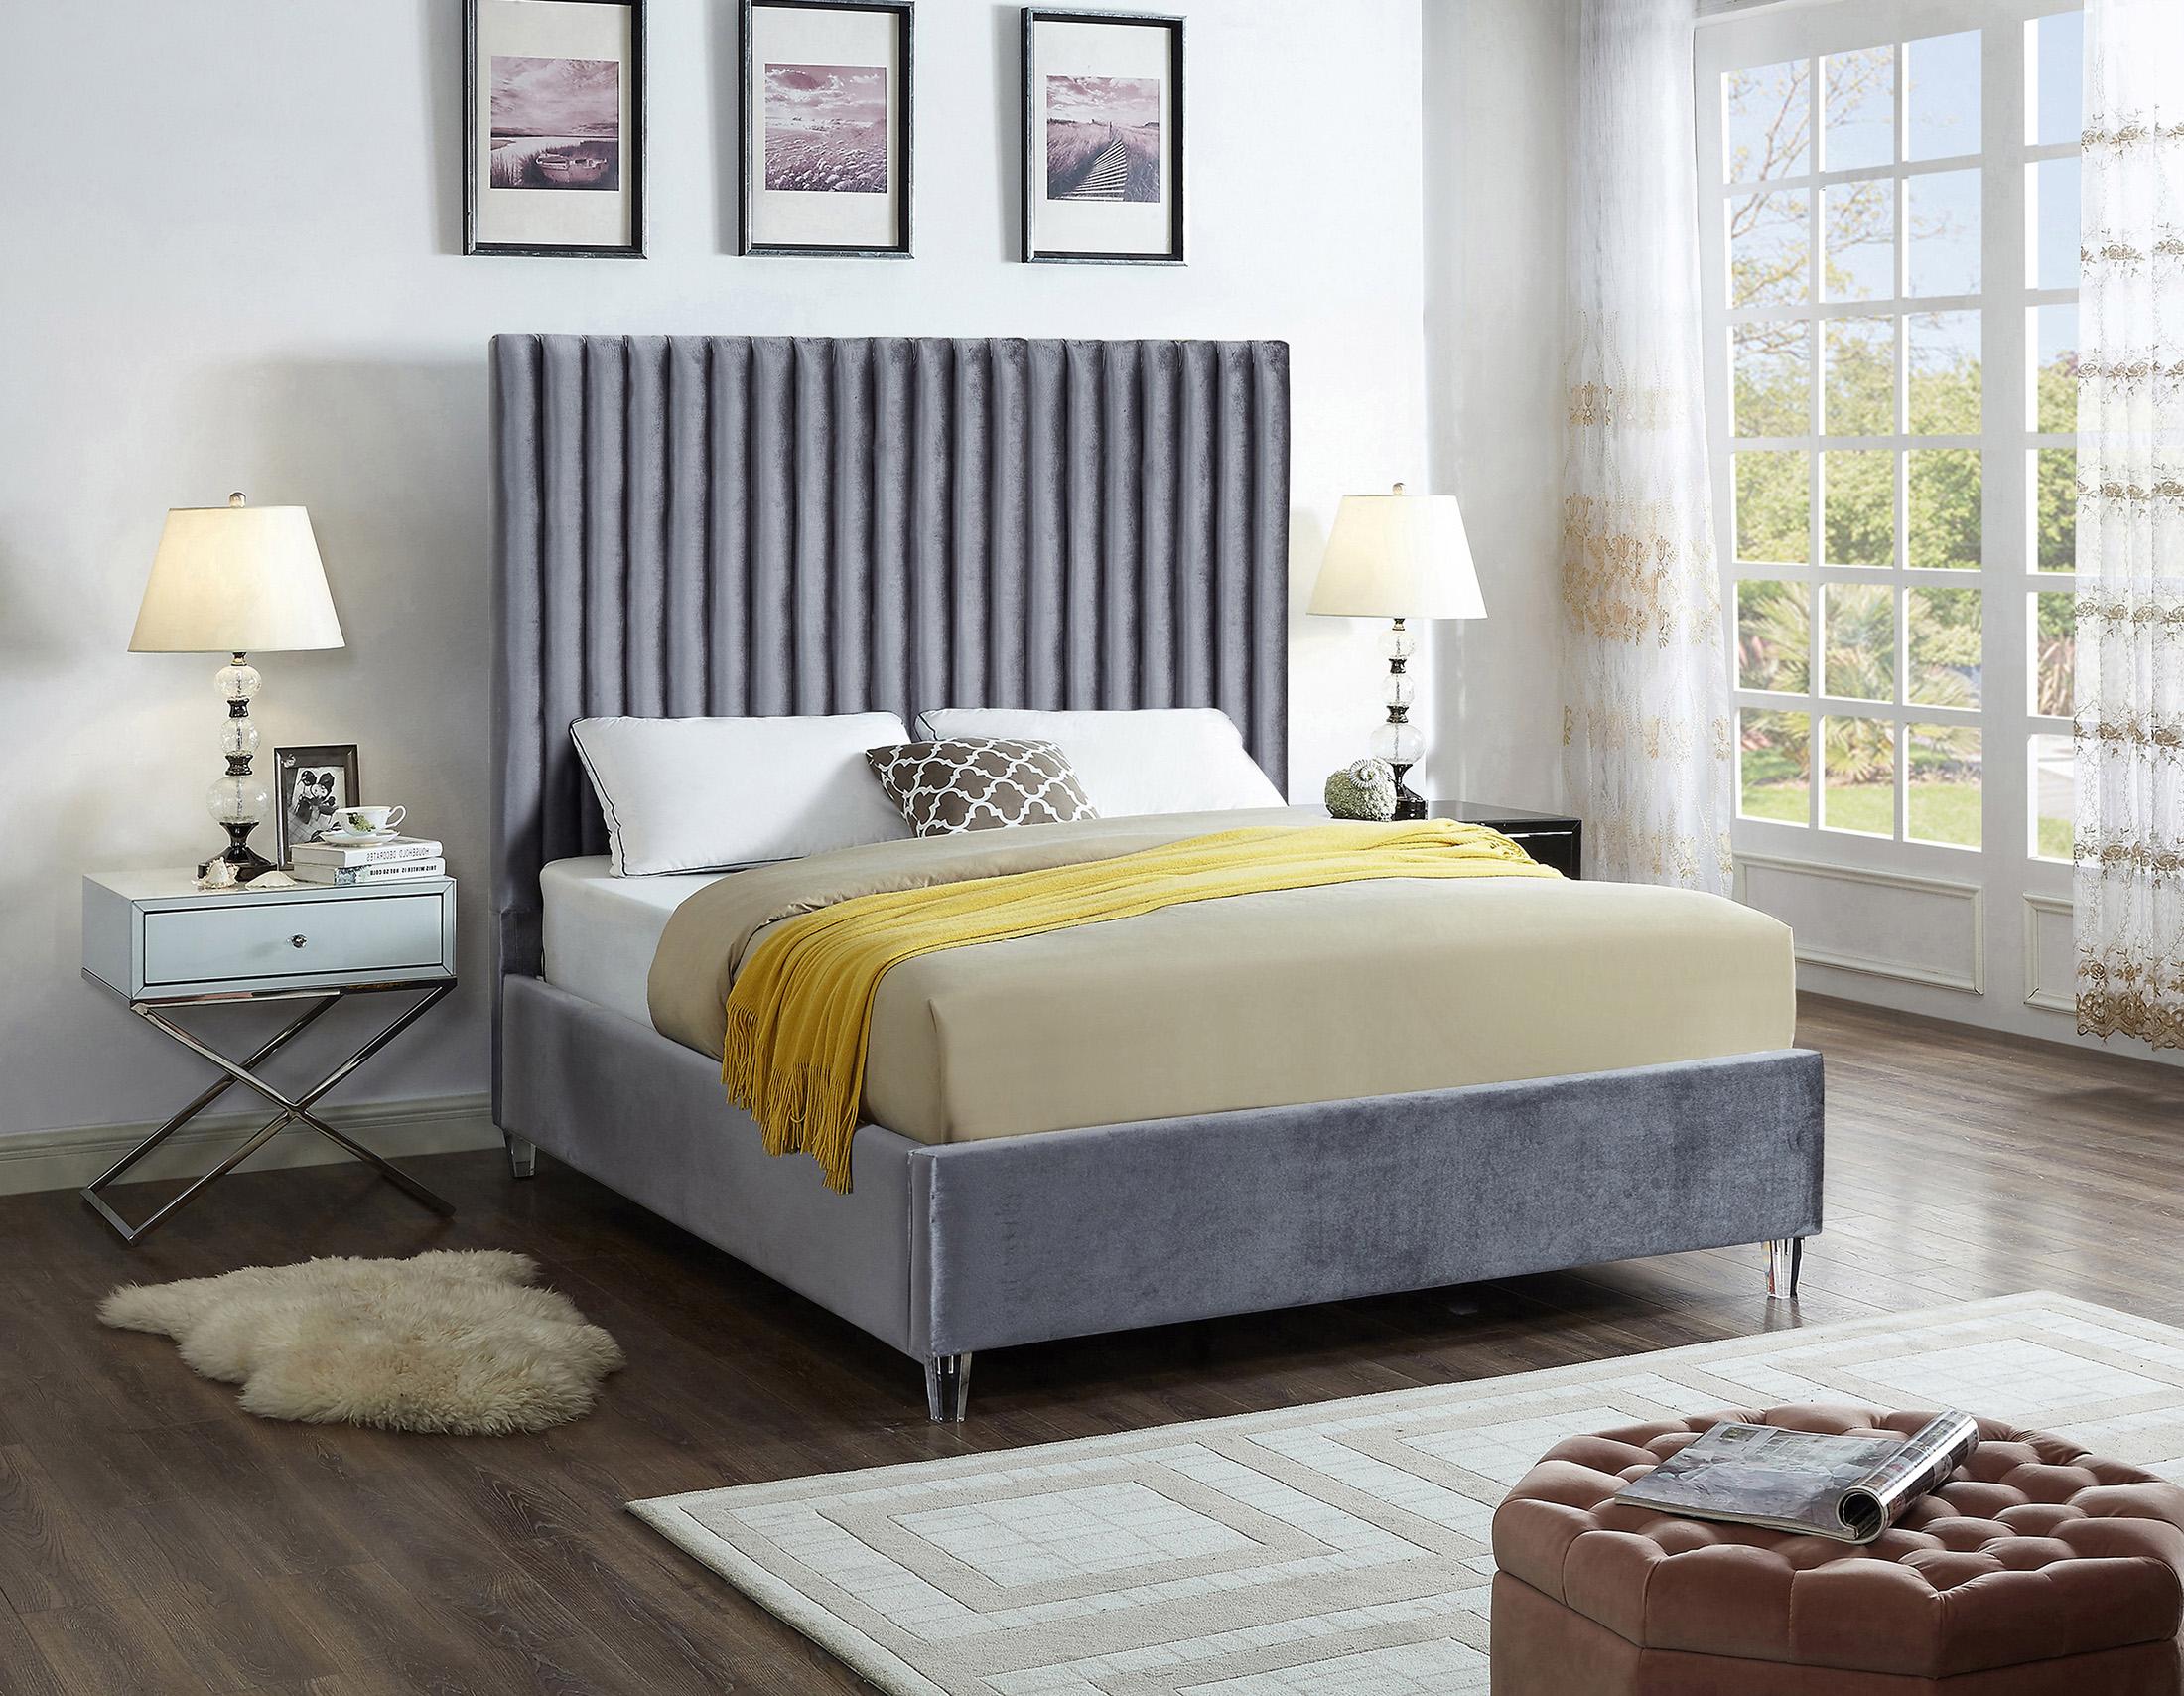 

    
GREY Velvet Channel Tufted Platform Full Bed Candace Meridian Contemporary
